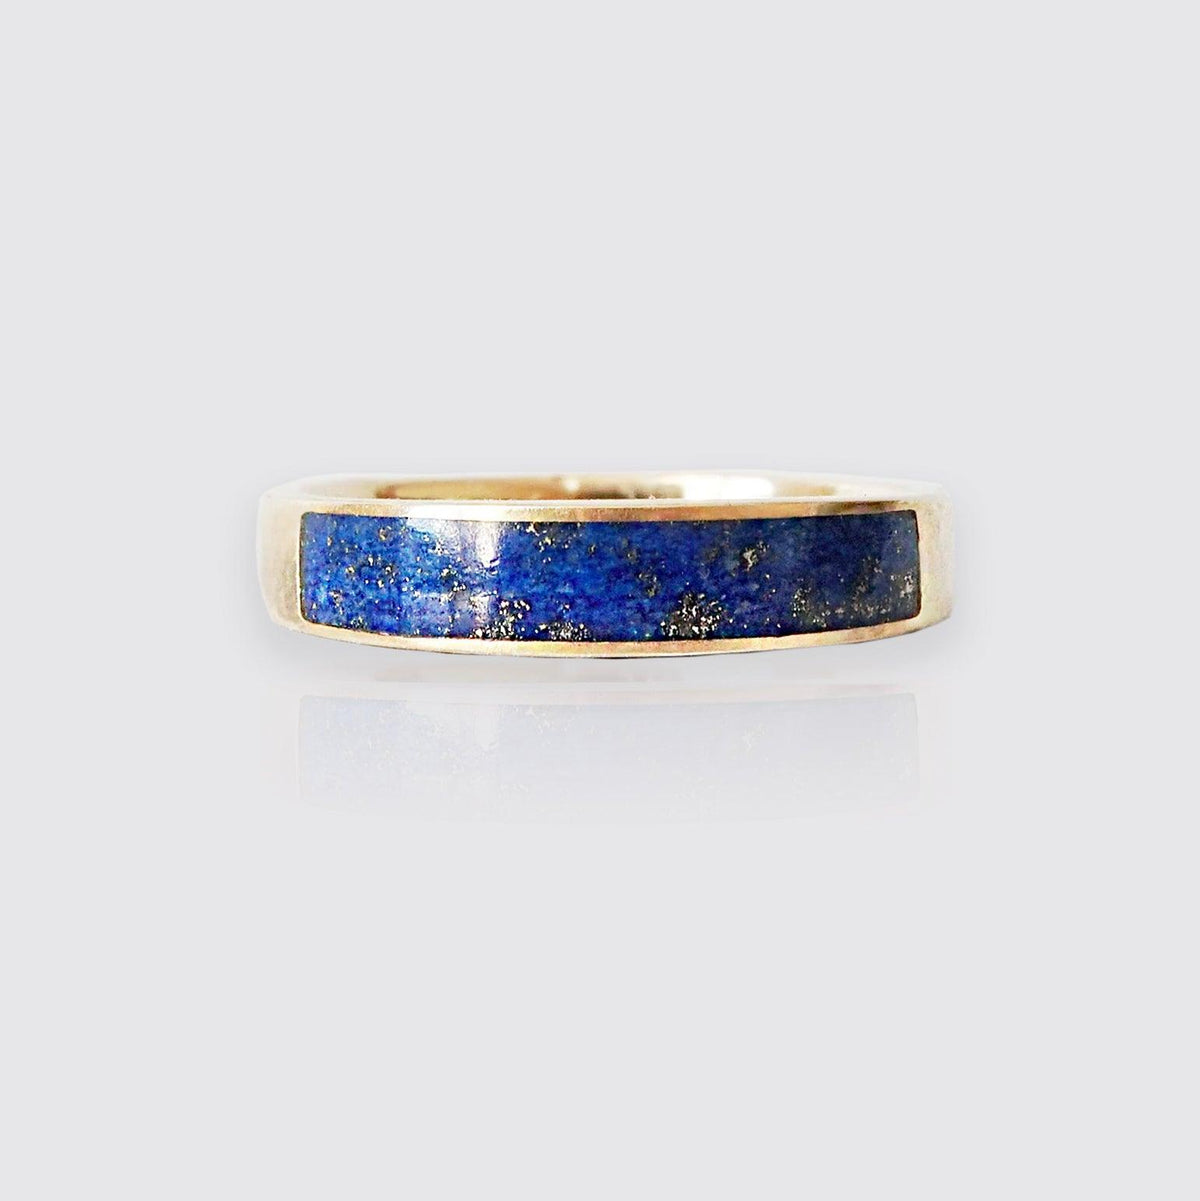 Lapis Lazuli Ring Band in Sterling Silver and 14K Gold, 3.5mm - Tippy Taste Jewelry